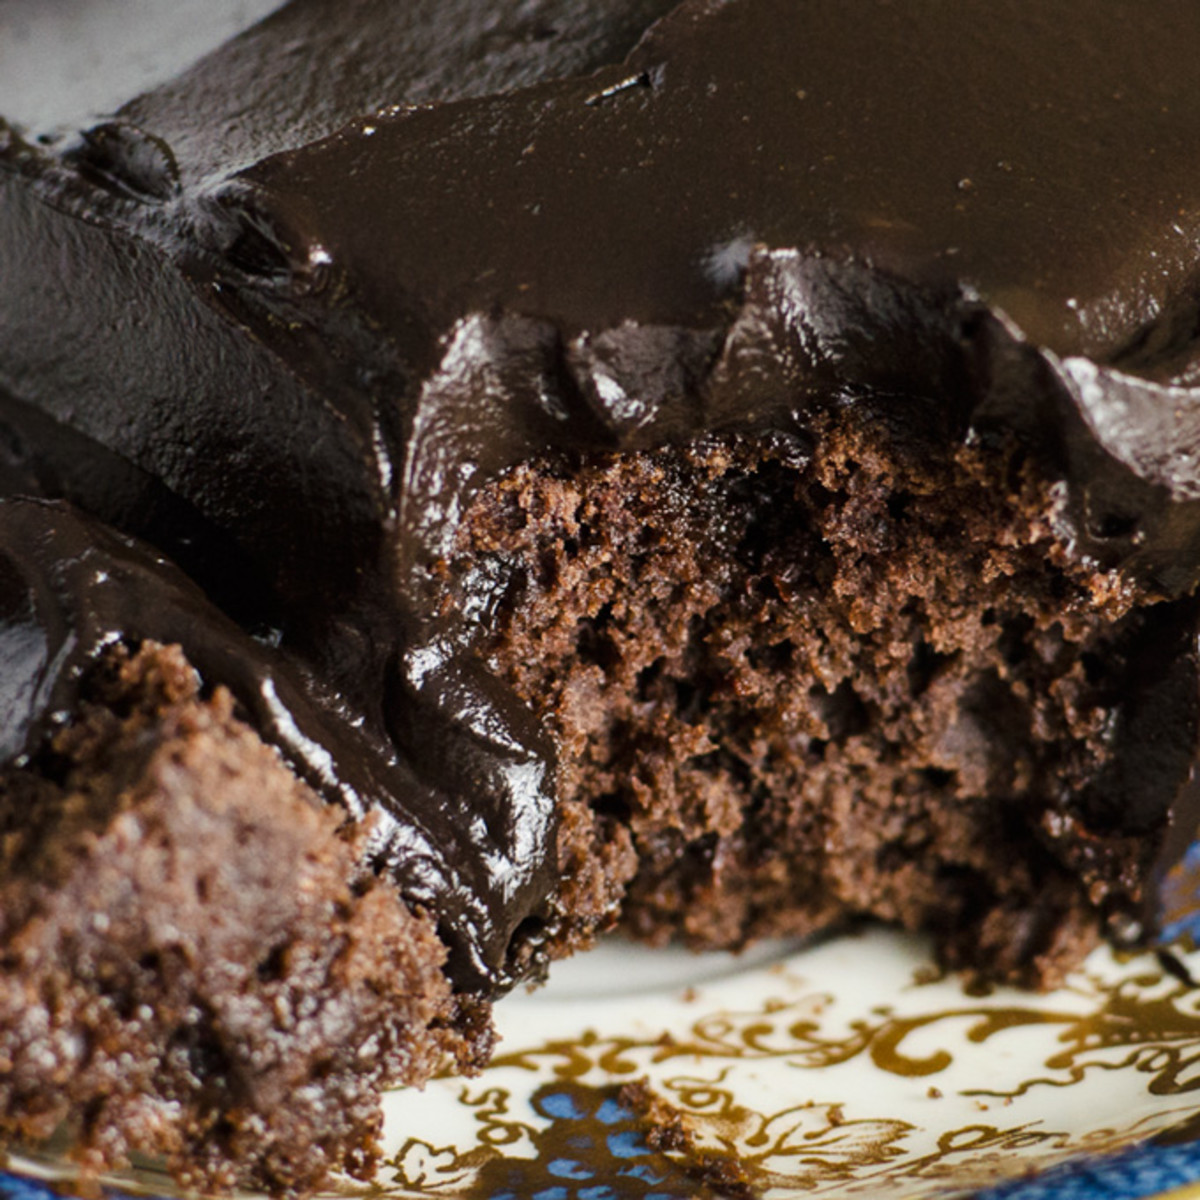 Chocolate avocado frosting—doesn't this look amazing!